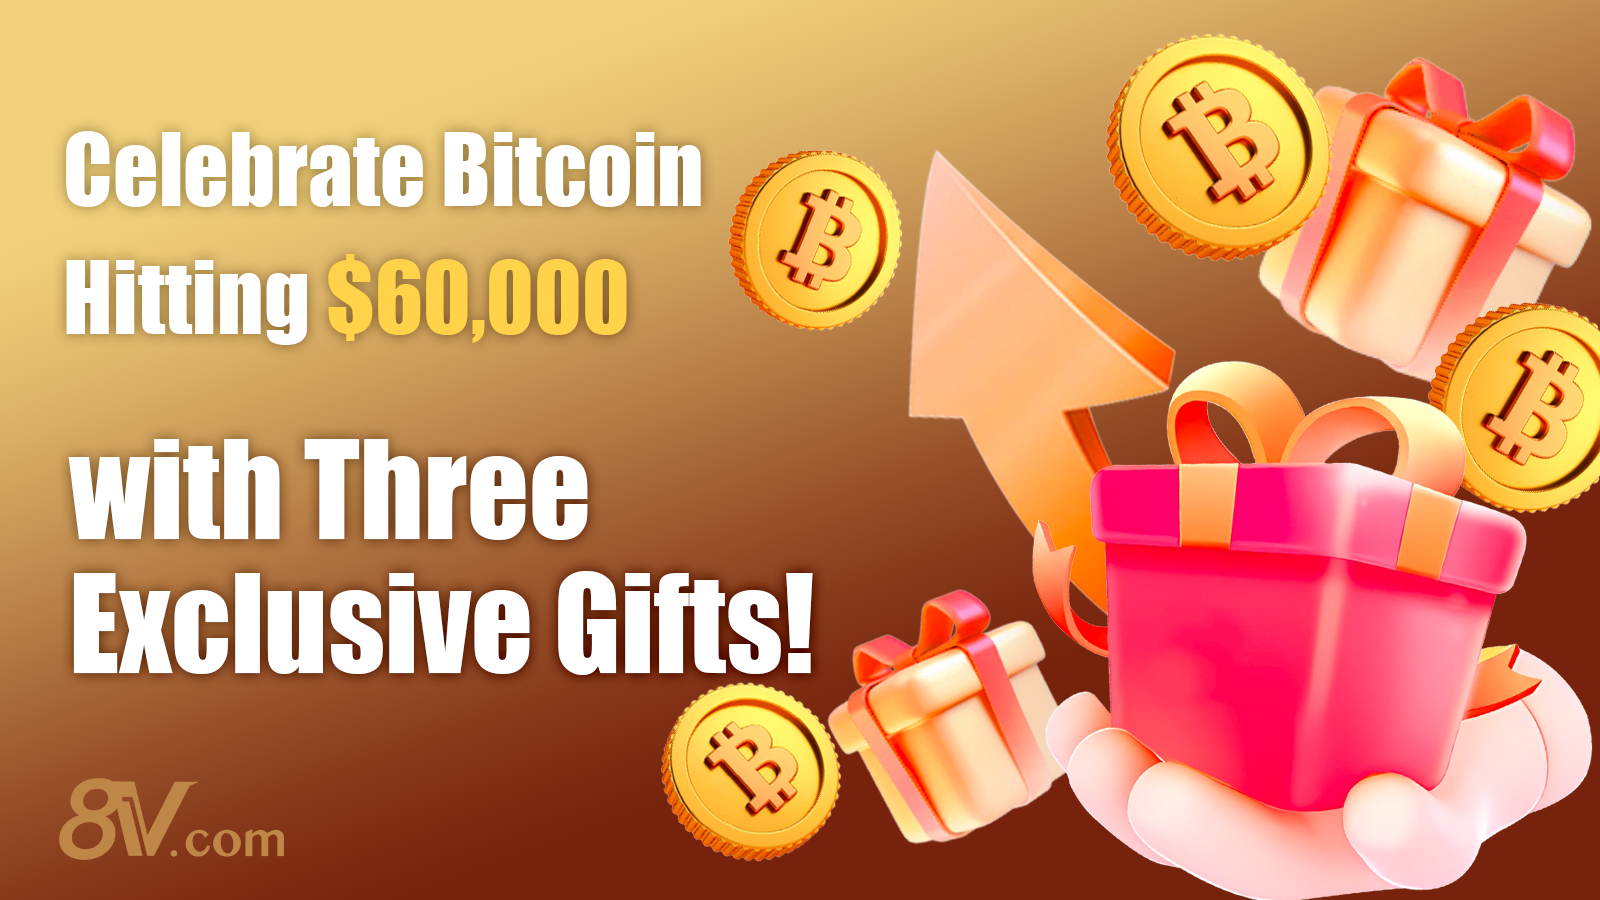 Celebrating BTC Breaking $60,000 - Triple Gifts for You